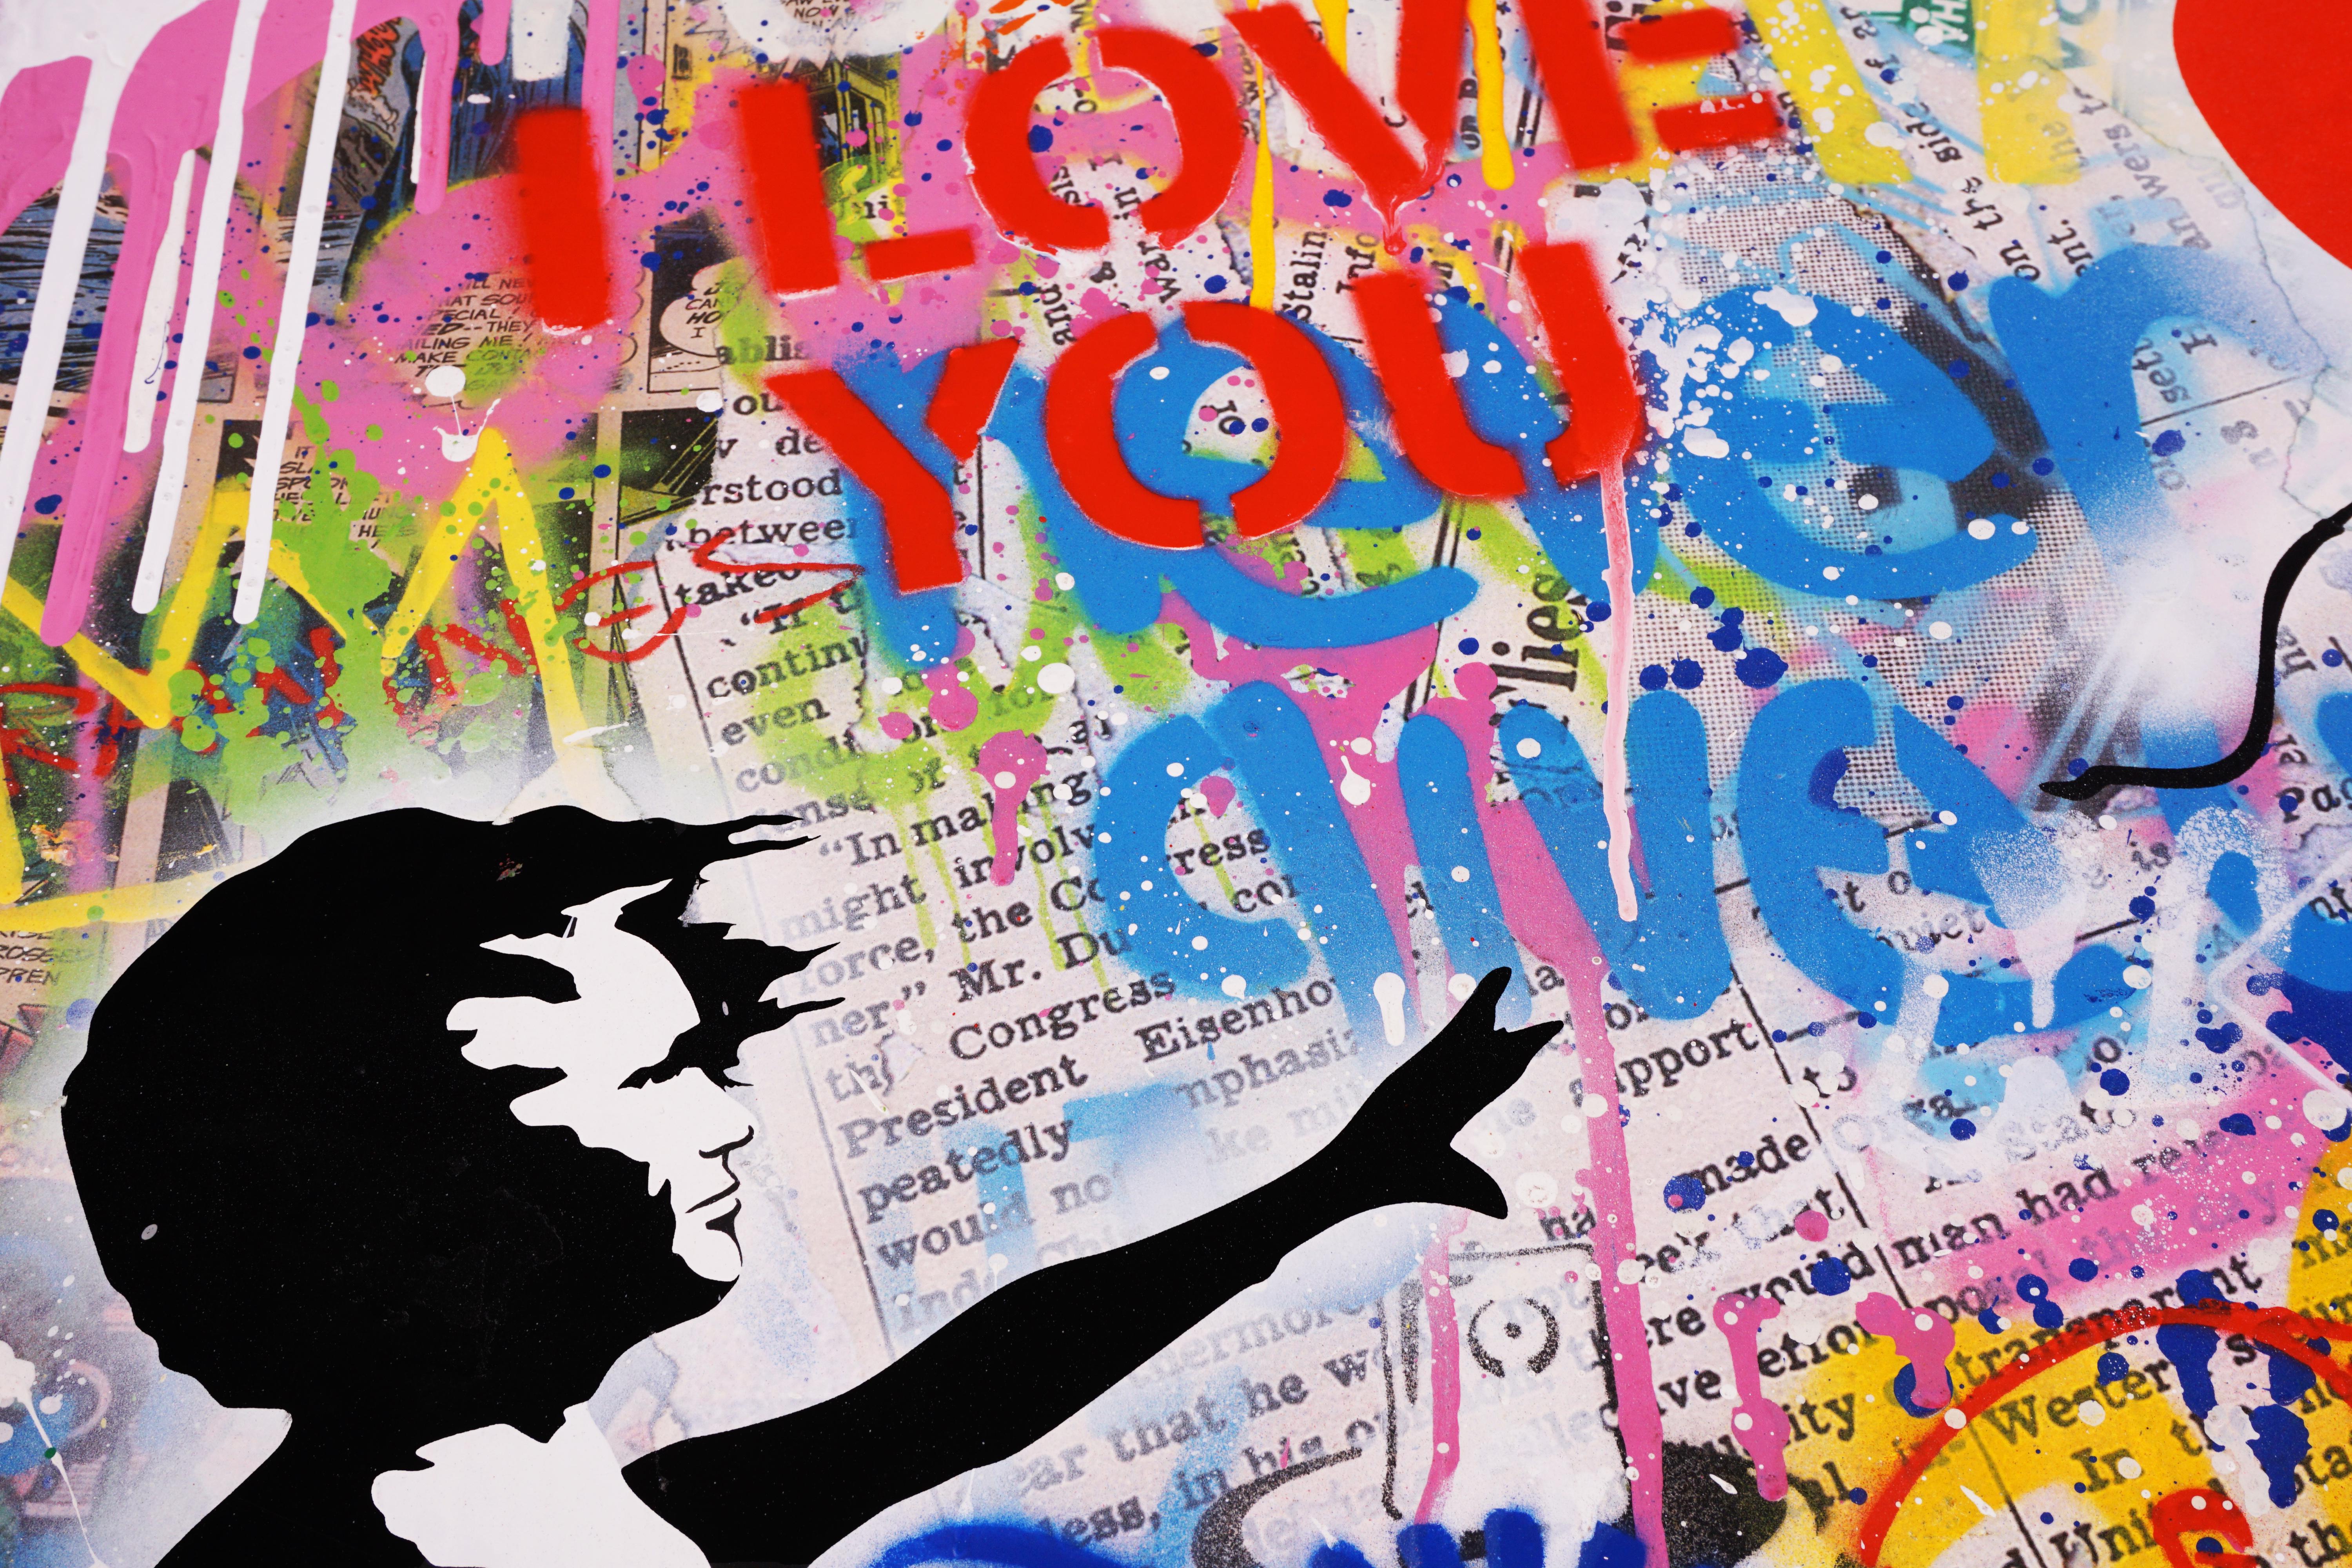 Mr. Brainwash, 'I Love You' Small Balloon Girl, Unique Painting, 2021 5